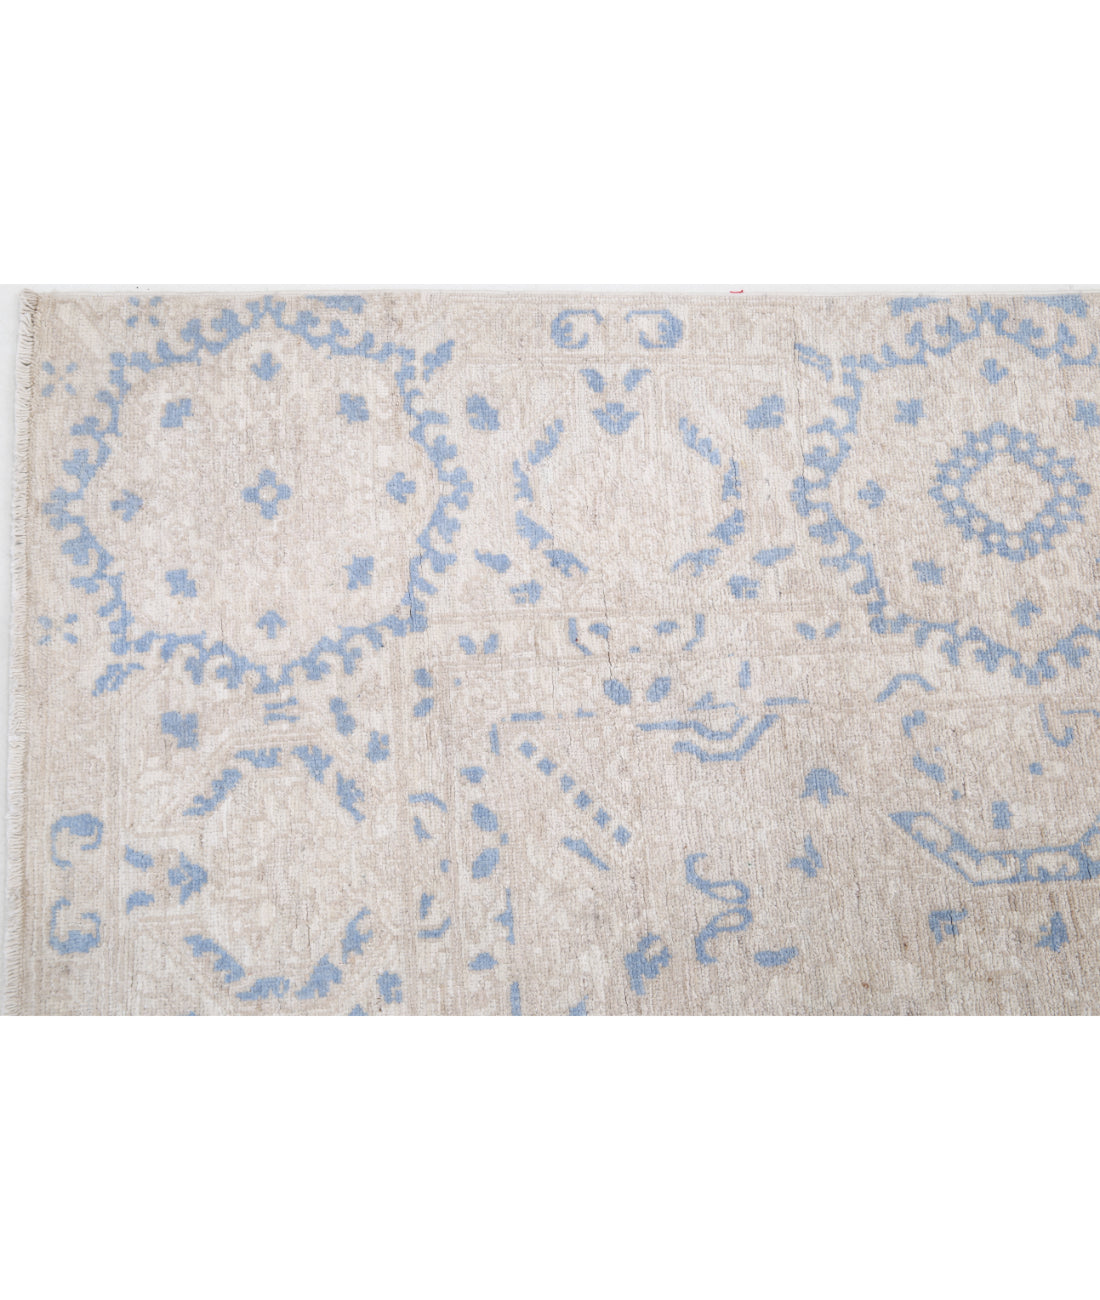 Hand Knotted Serenity Artemix Wool Rug - 4'10'' x 7'2'' 4'10'' x 7'2'' (145 X 215) / Ivory / Ivory